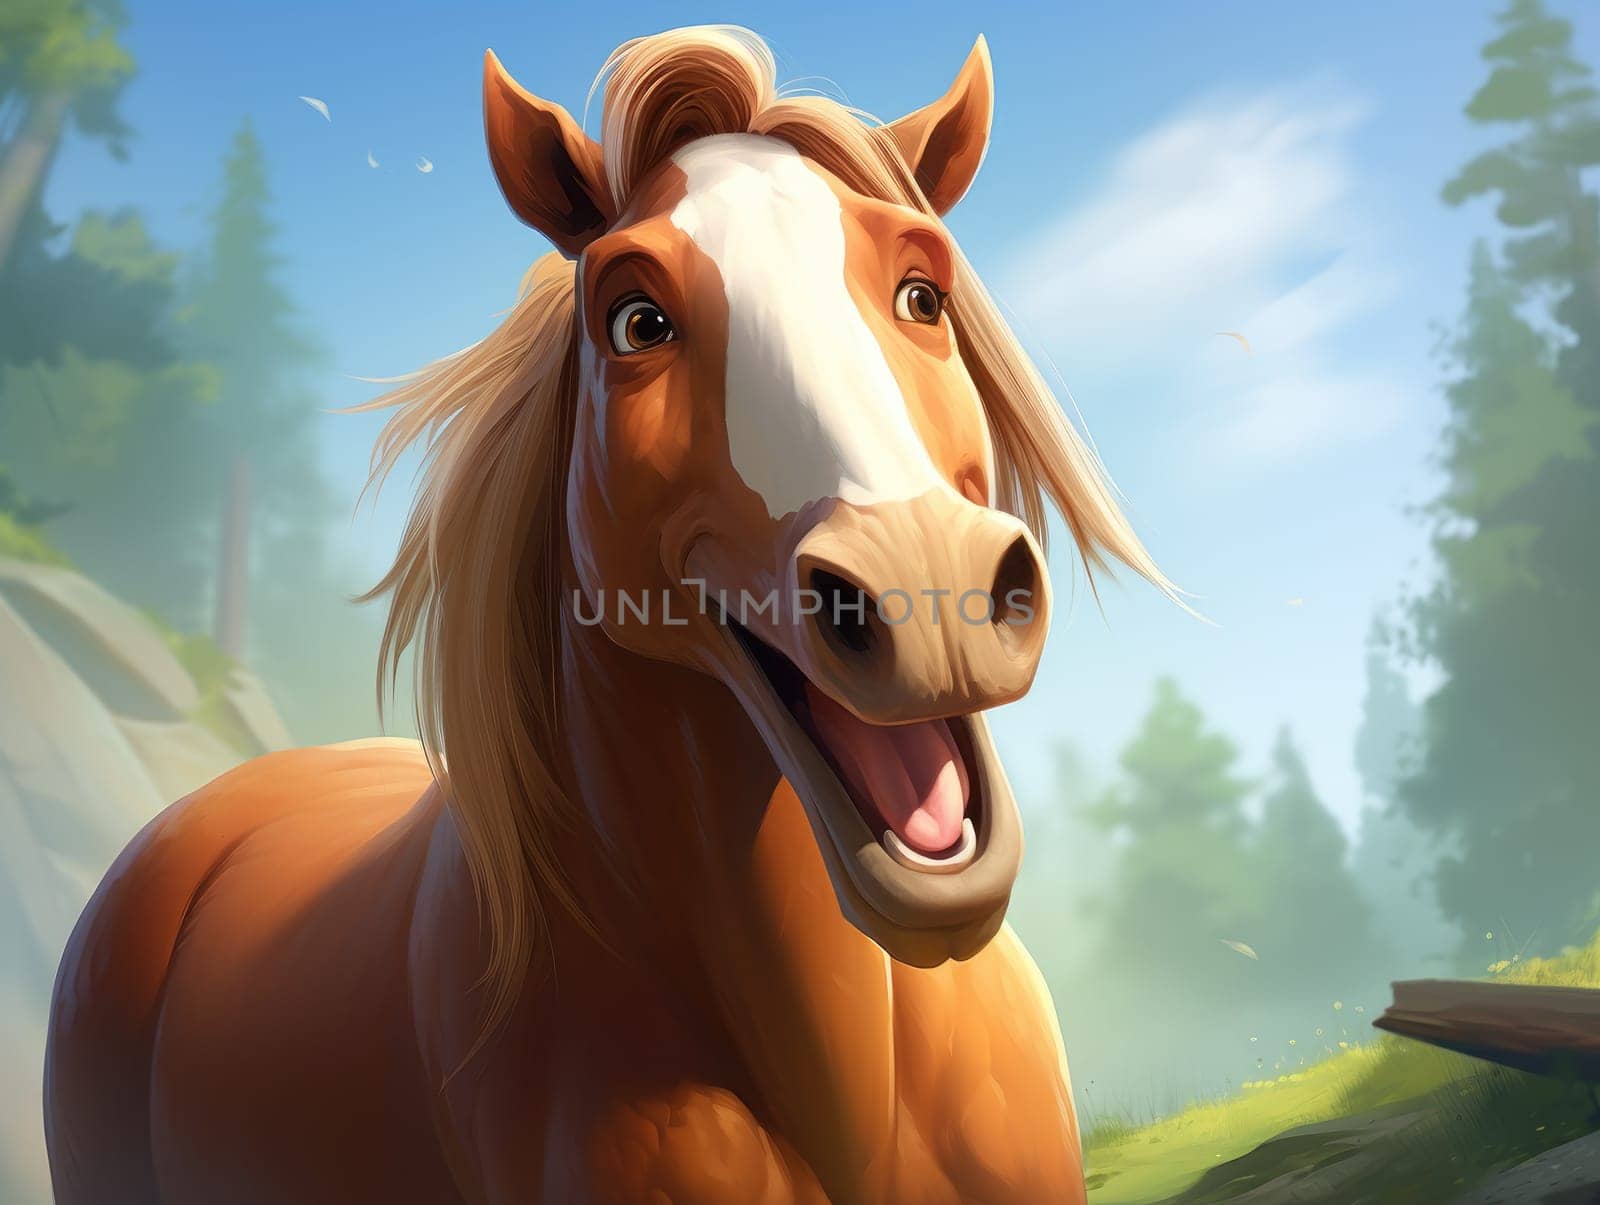 Happy, smiling horse outside, animal concept by Kadula